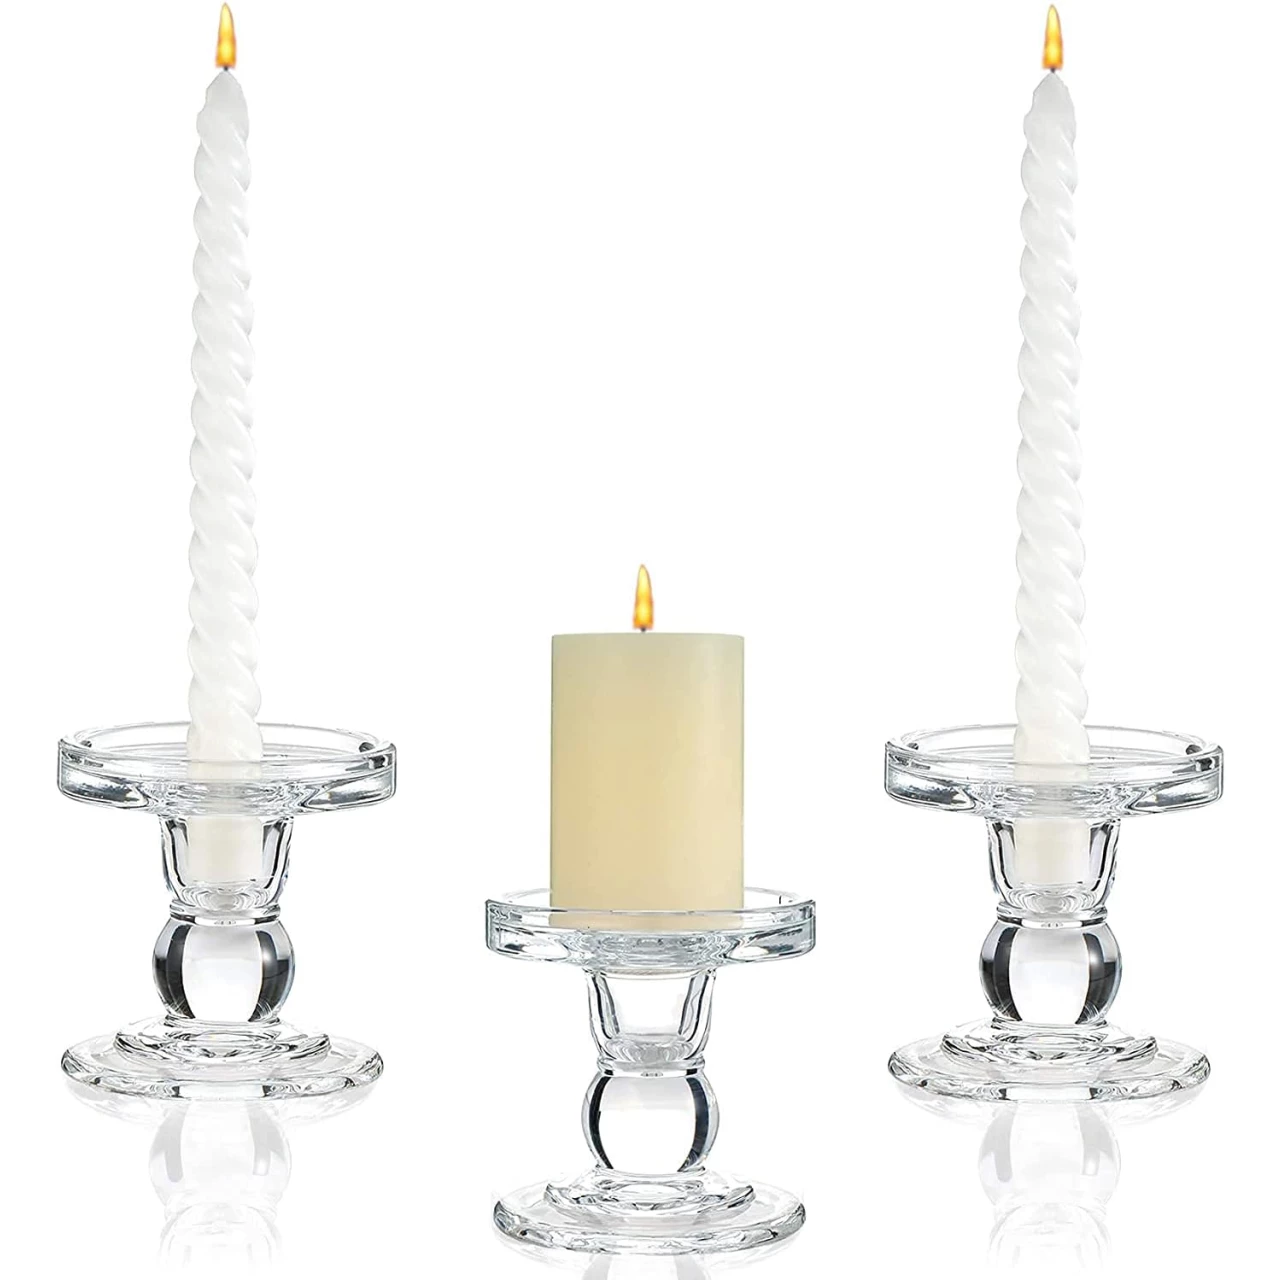 Glass Candle Holder for Pillar Taper Candlestick Holders